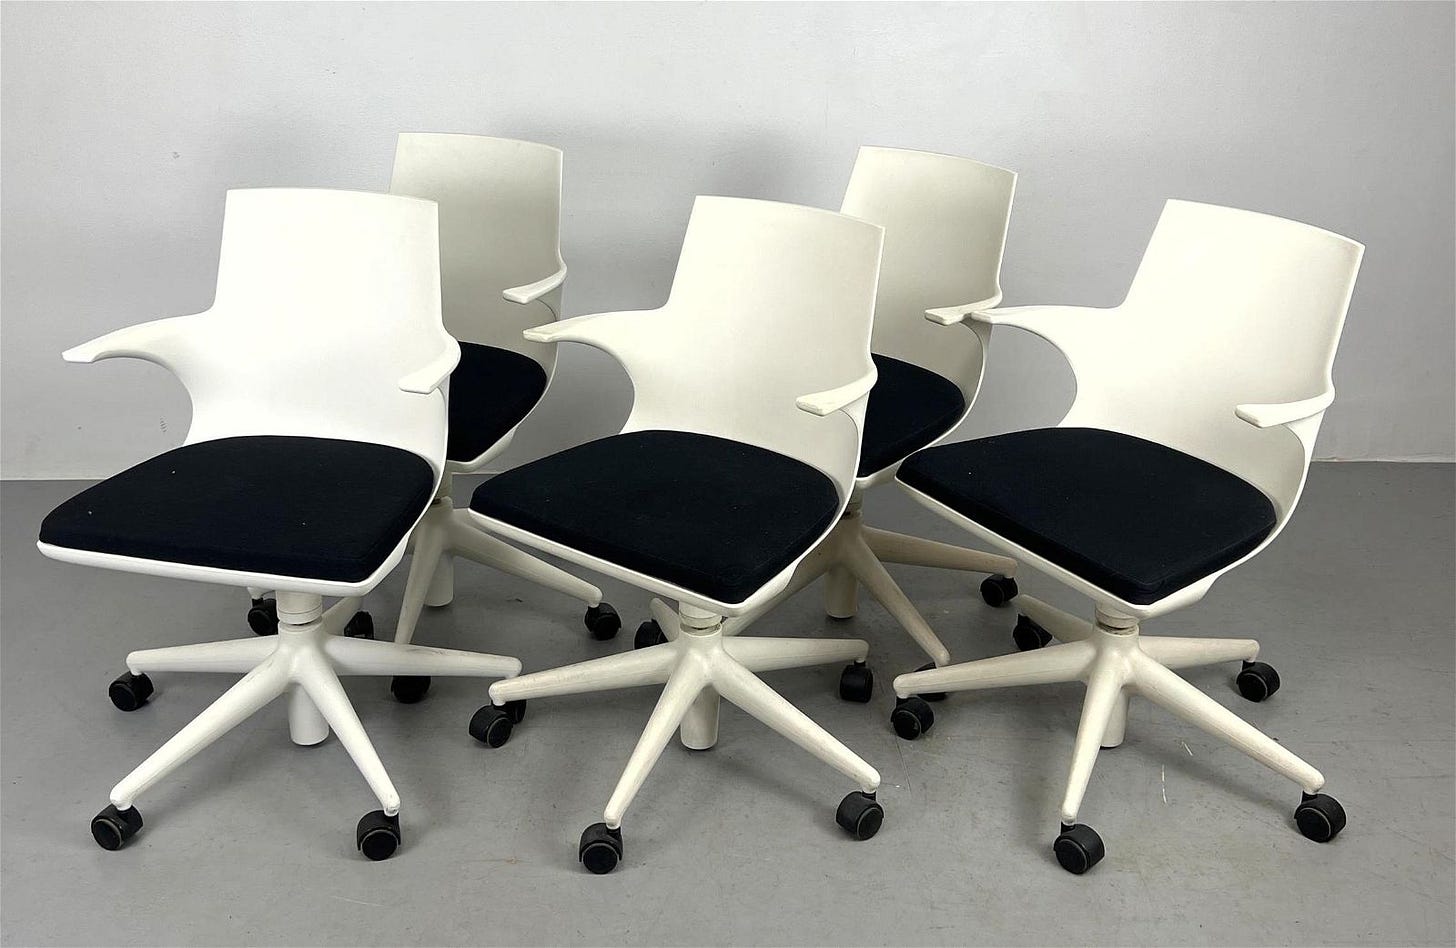 Set 5 KARTELL White Desk Office Chairs. "Spoon" Chair designed by CITTERIO. Adjustable height.